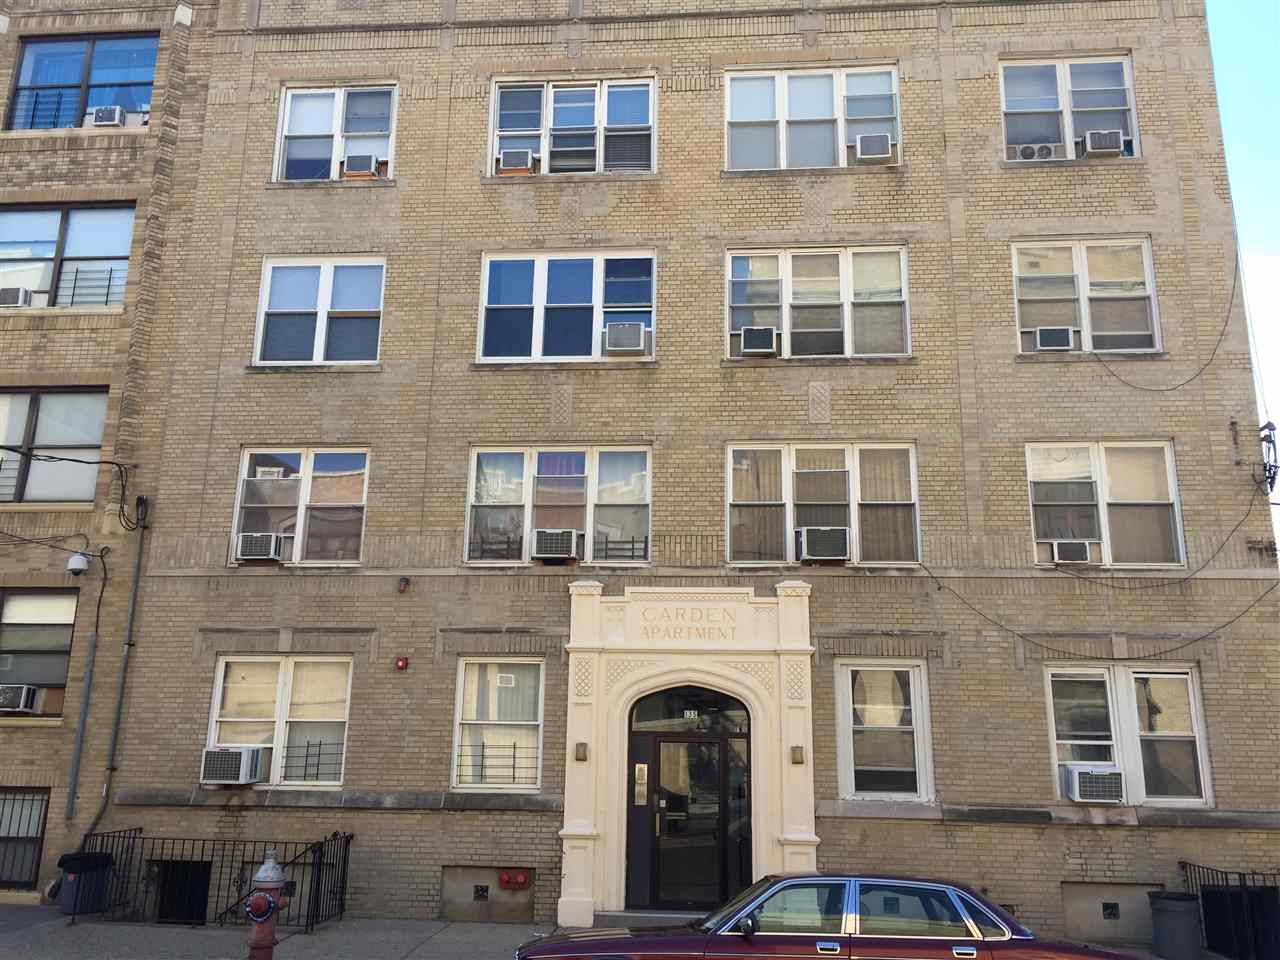 This is one of a few 3 bedroom ground level condo - 3 BR Condo New Jersey